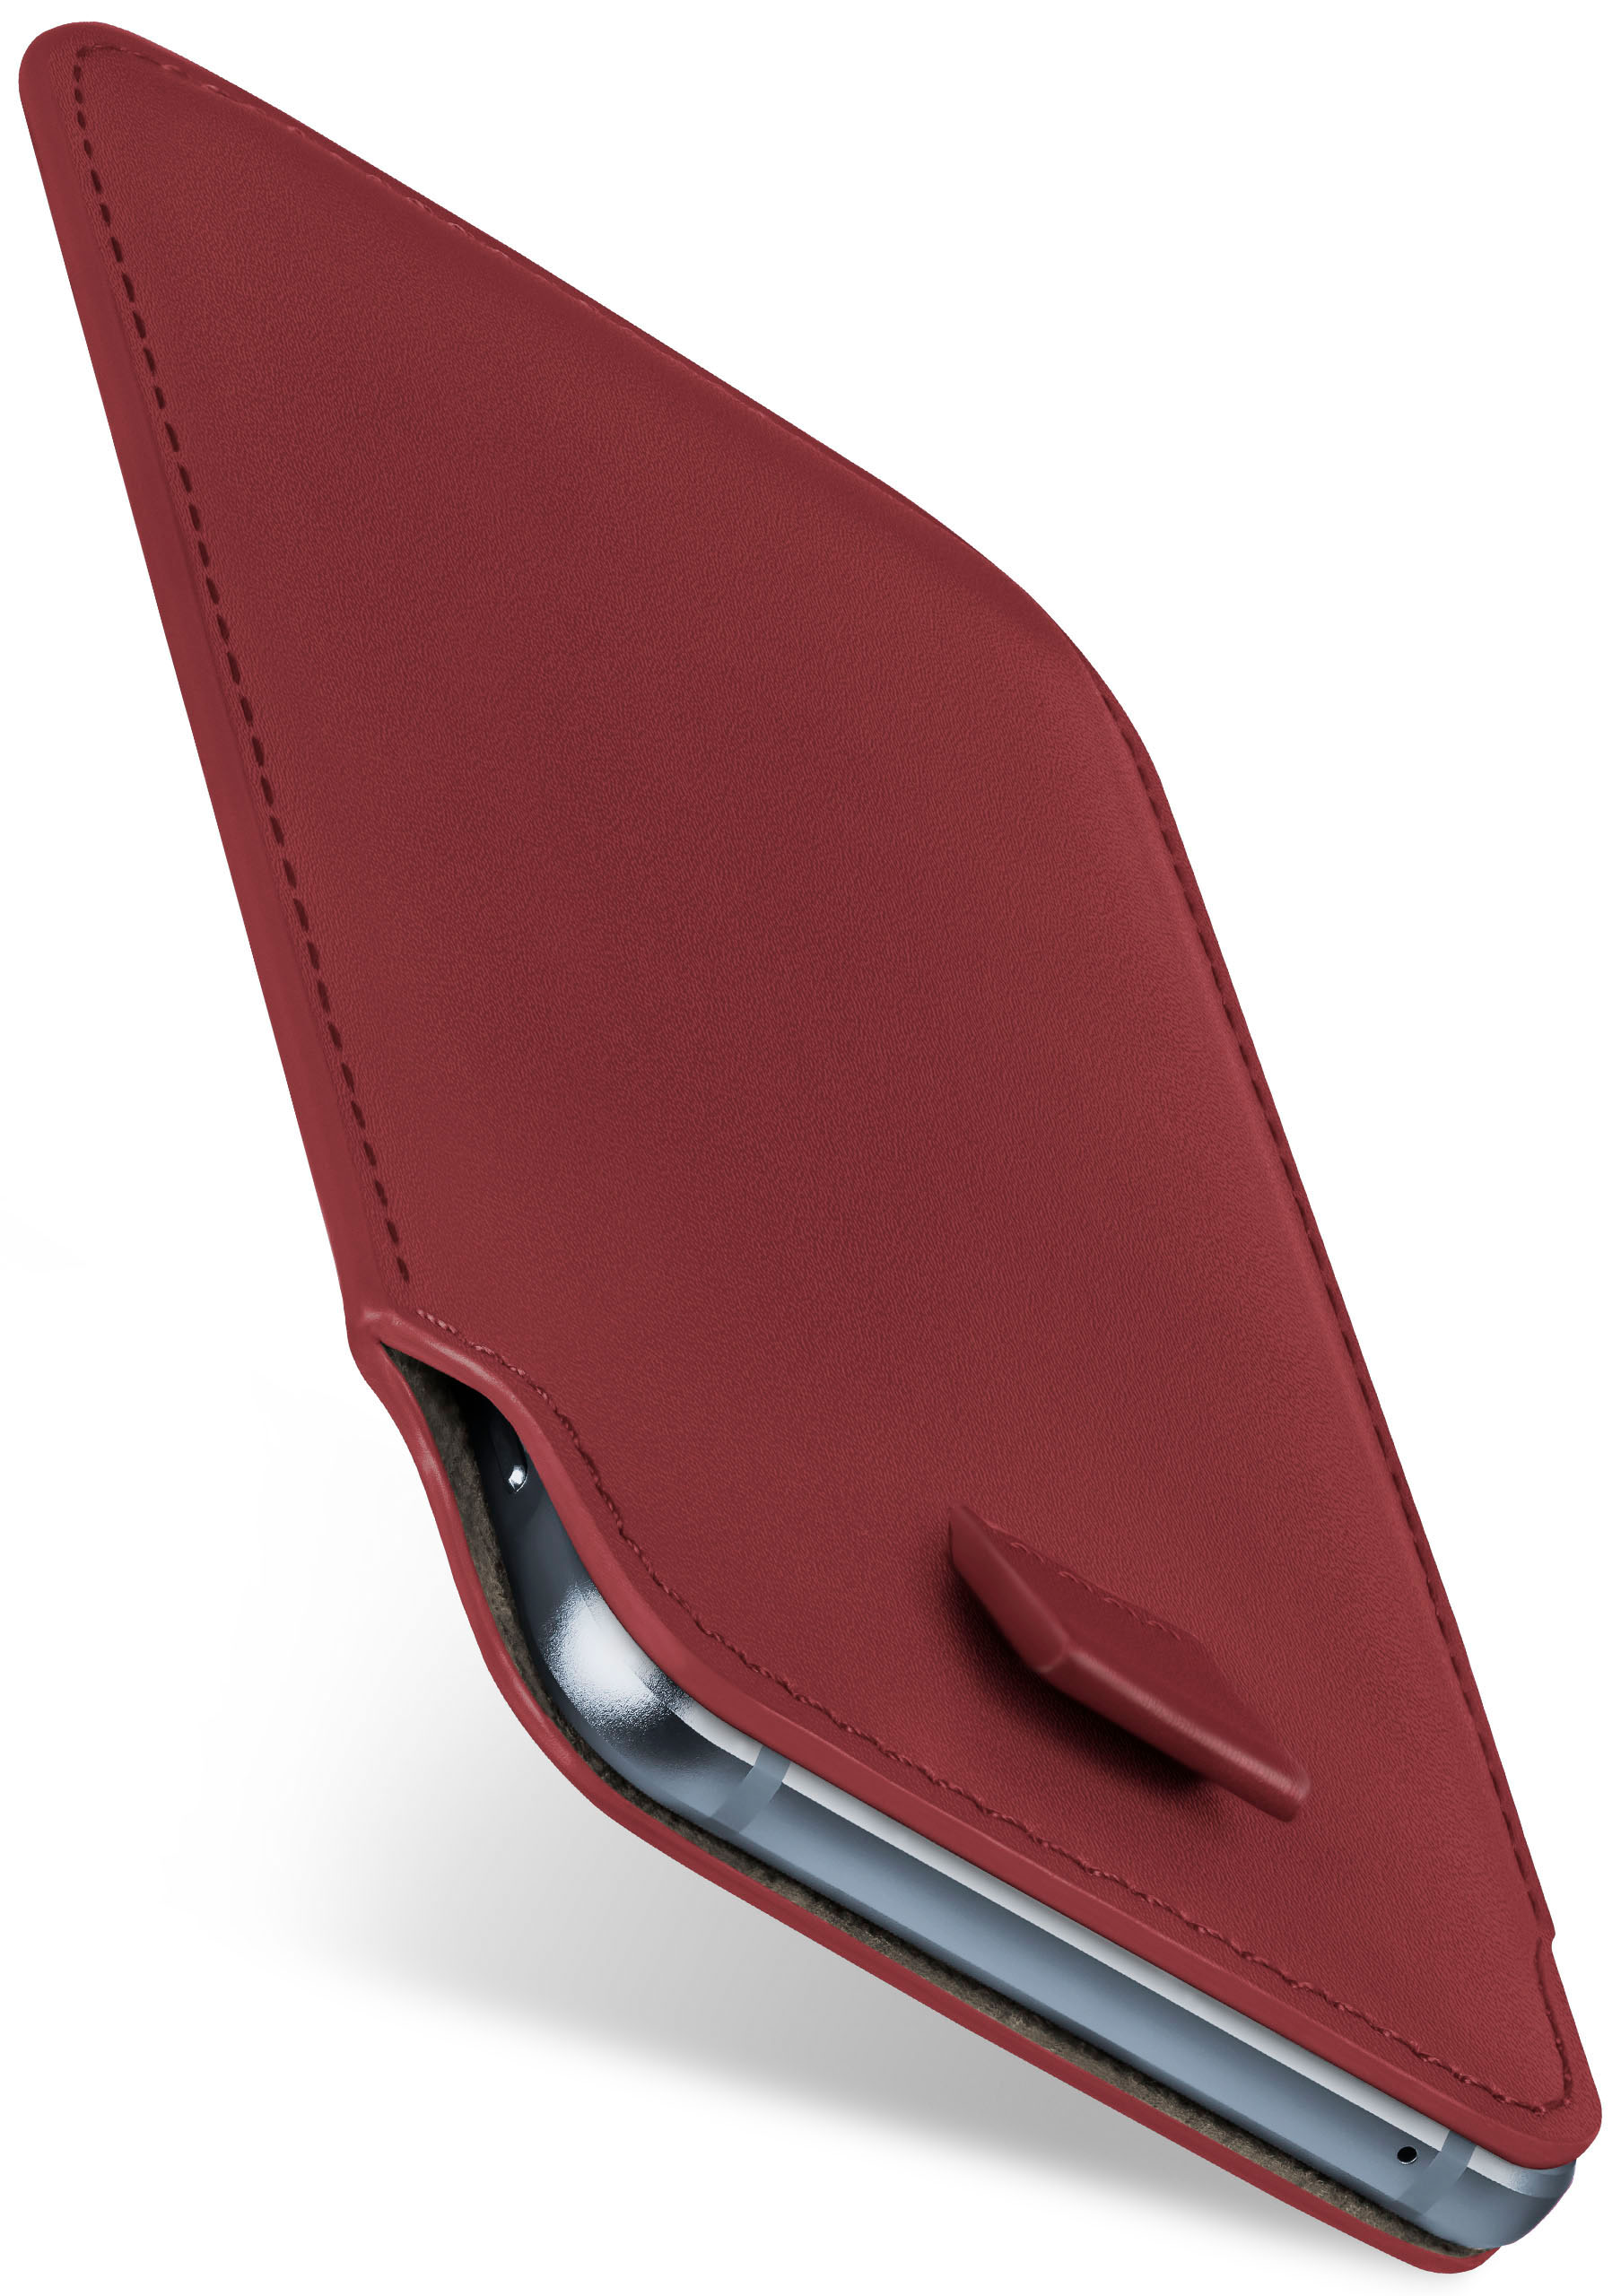 Case, Slide X, Find Full Cover, Oppo, MOEX Maroon-Red